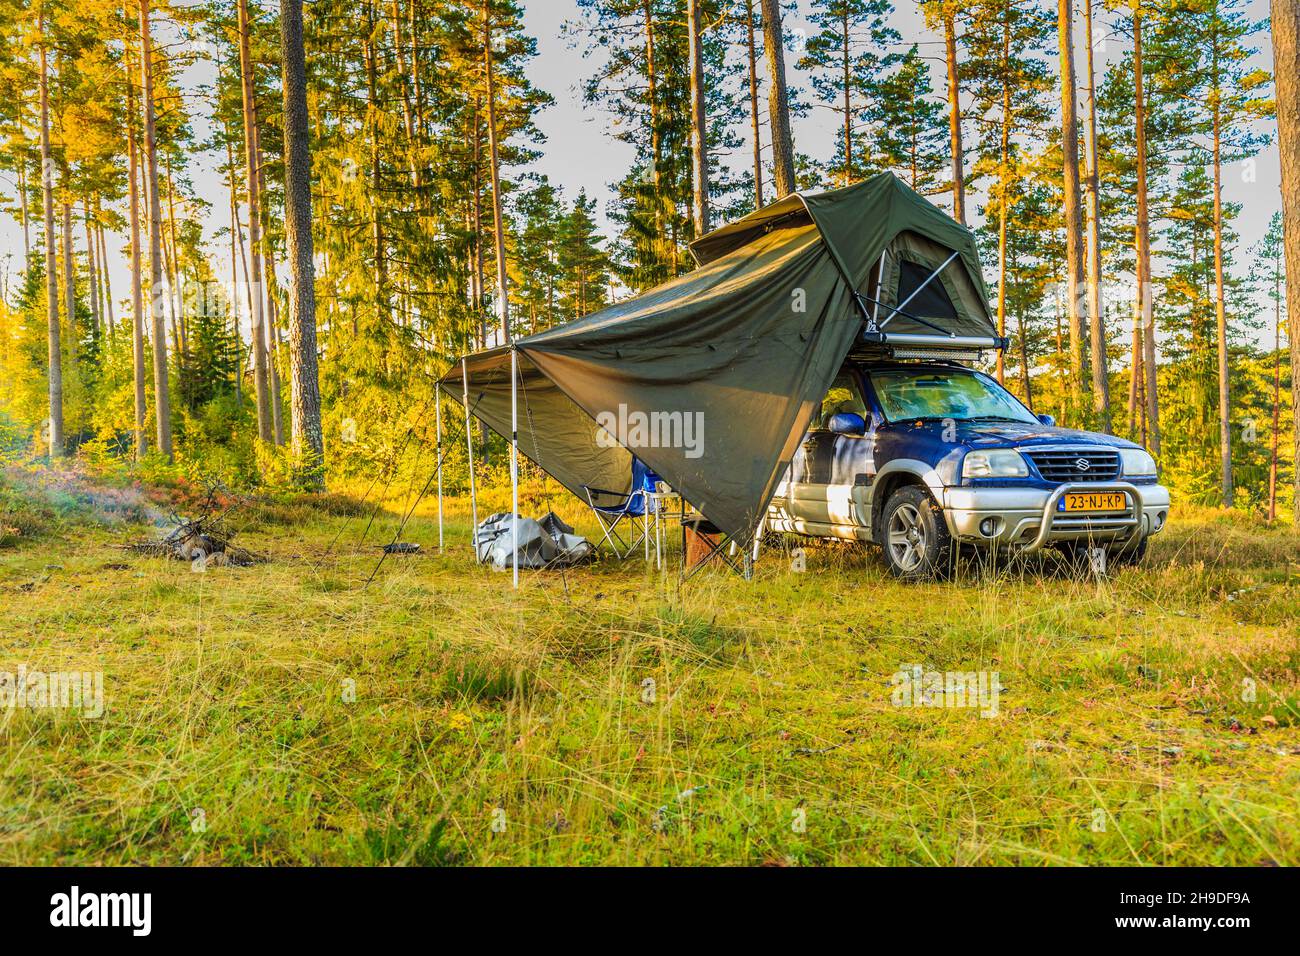 Sandhem, Västra Götaland County, Sweden, October 10, 2019: Wild camping in the forests of Sweden with four wheel off-road vehicle Suzuki Vitara 2.0 Stock Photo